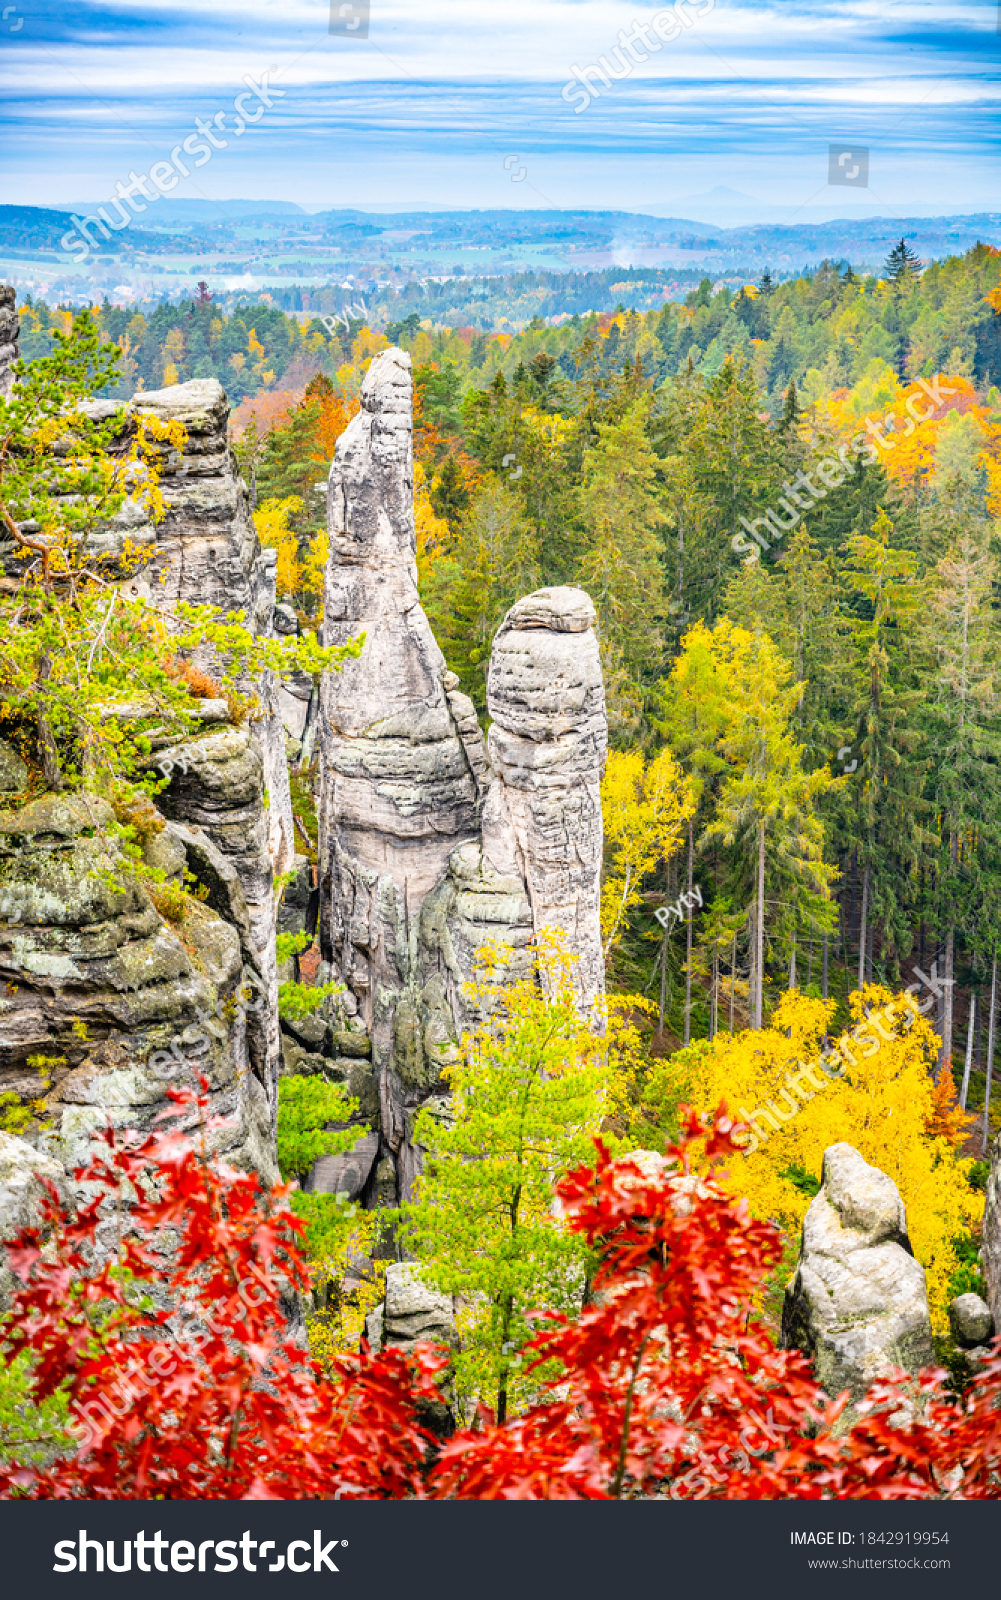 Prachov Rocks, Czech: Prachovske skaly, sandstone rock formation with colorful trees of autumn. View from Bohemian Paradise lookout point, Czech Republic. #1842919954